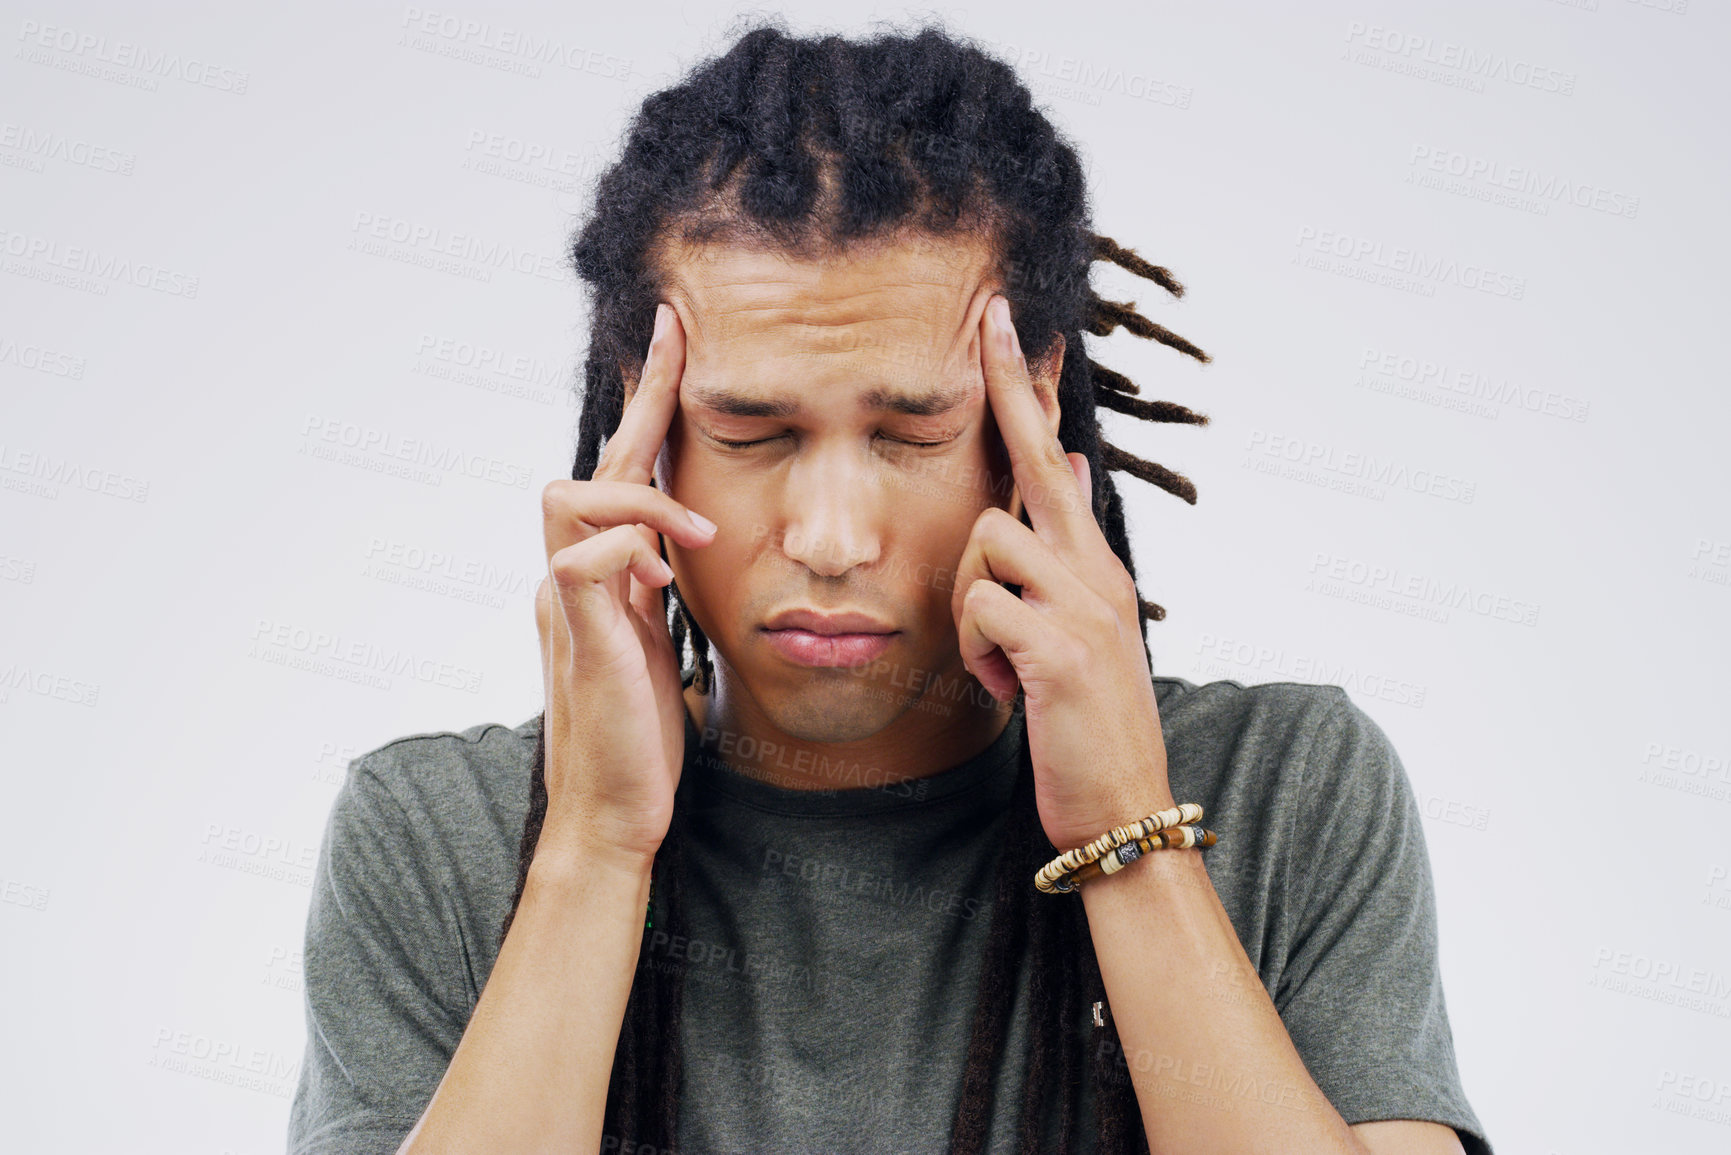 Buy stock photo Shot of a young man holding his head while suffering from a headache against a grey background